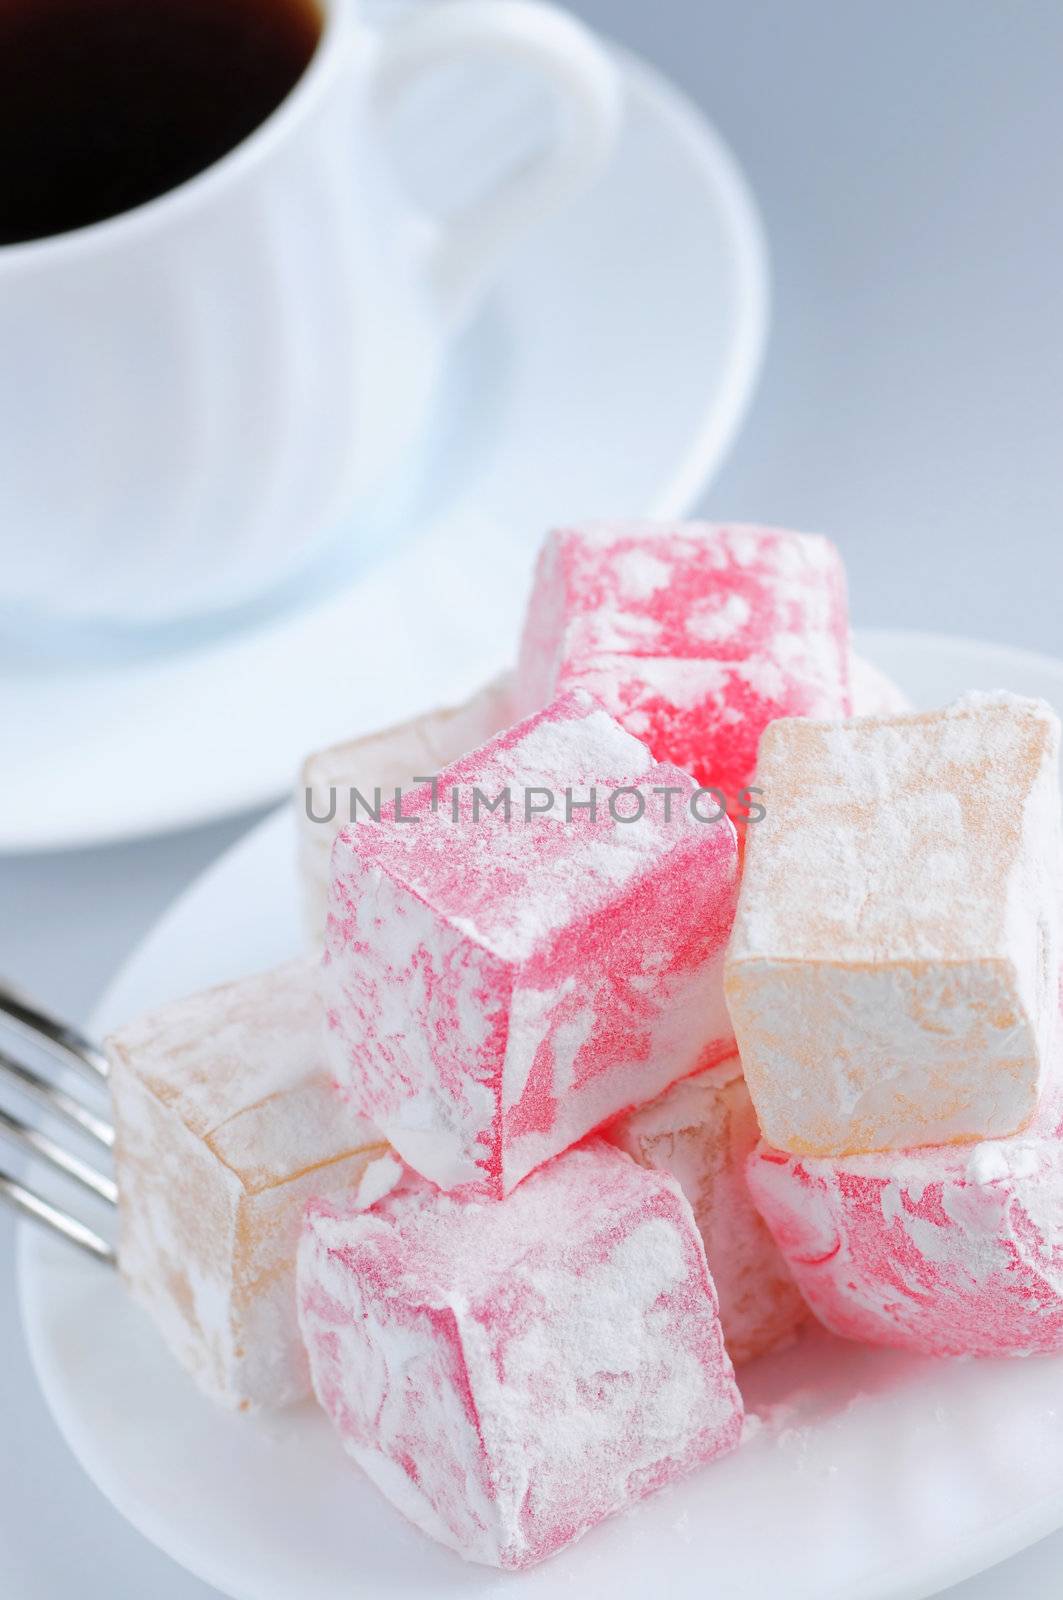 Turkish delight (lokum) confection with black coffee